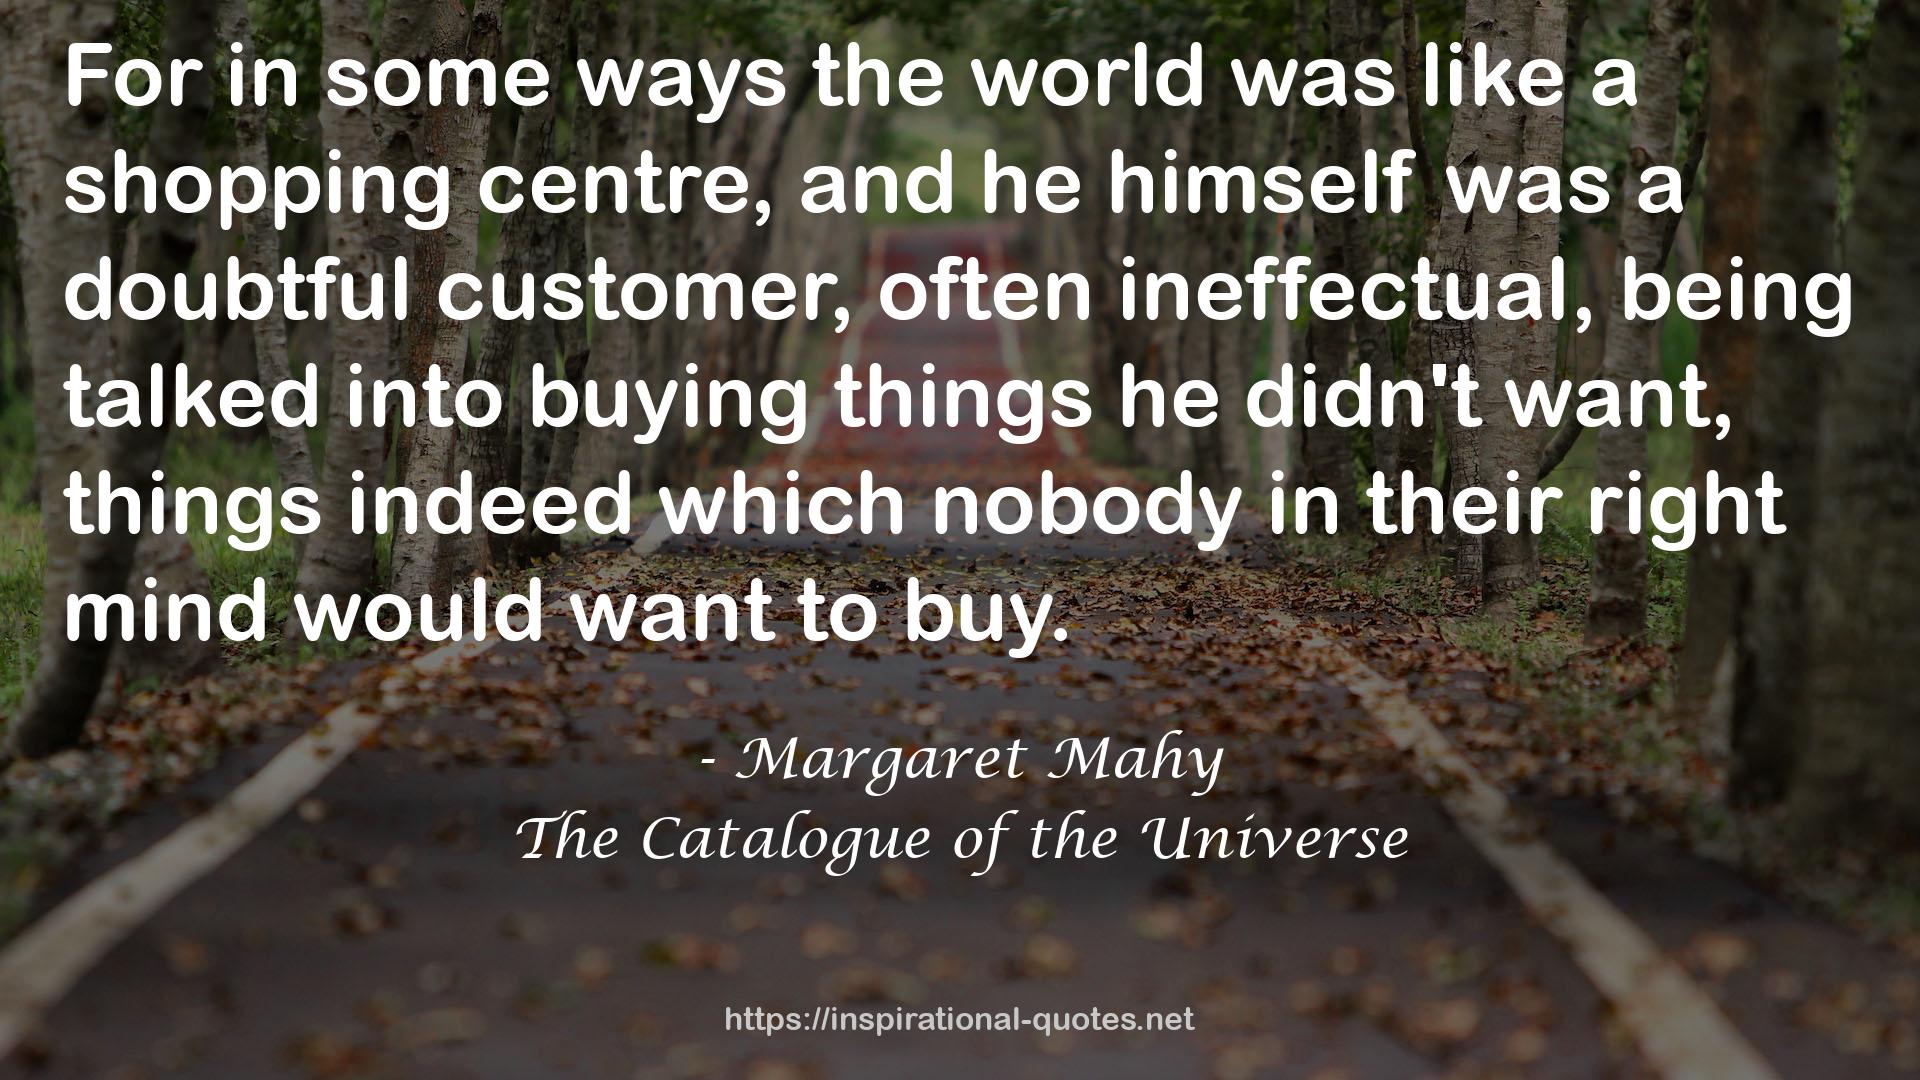 The Catalogue of the Universe QUOTES